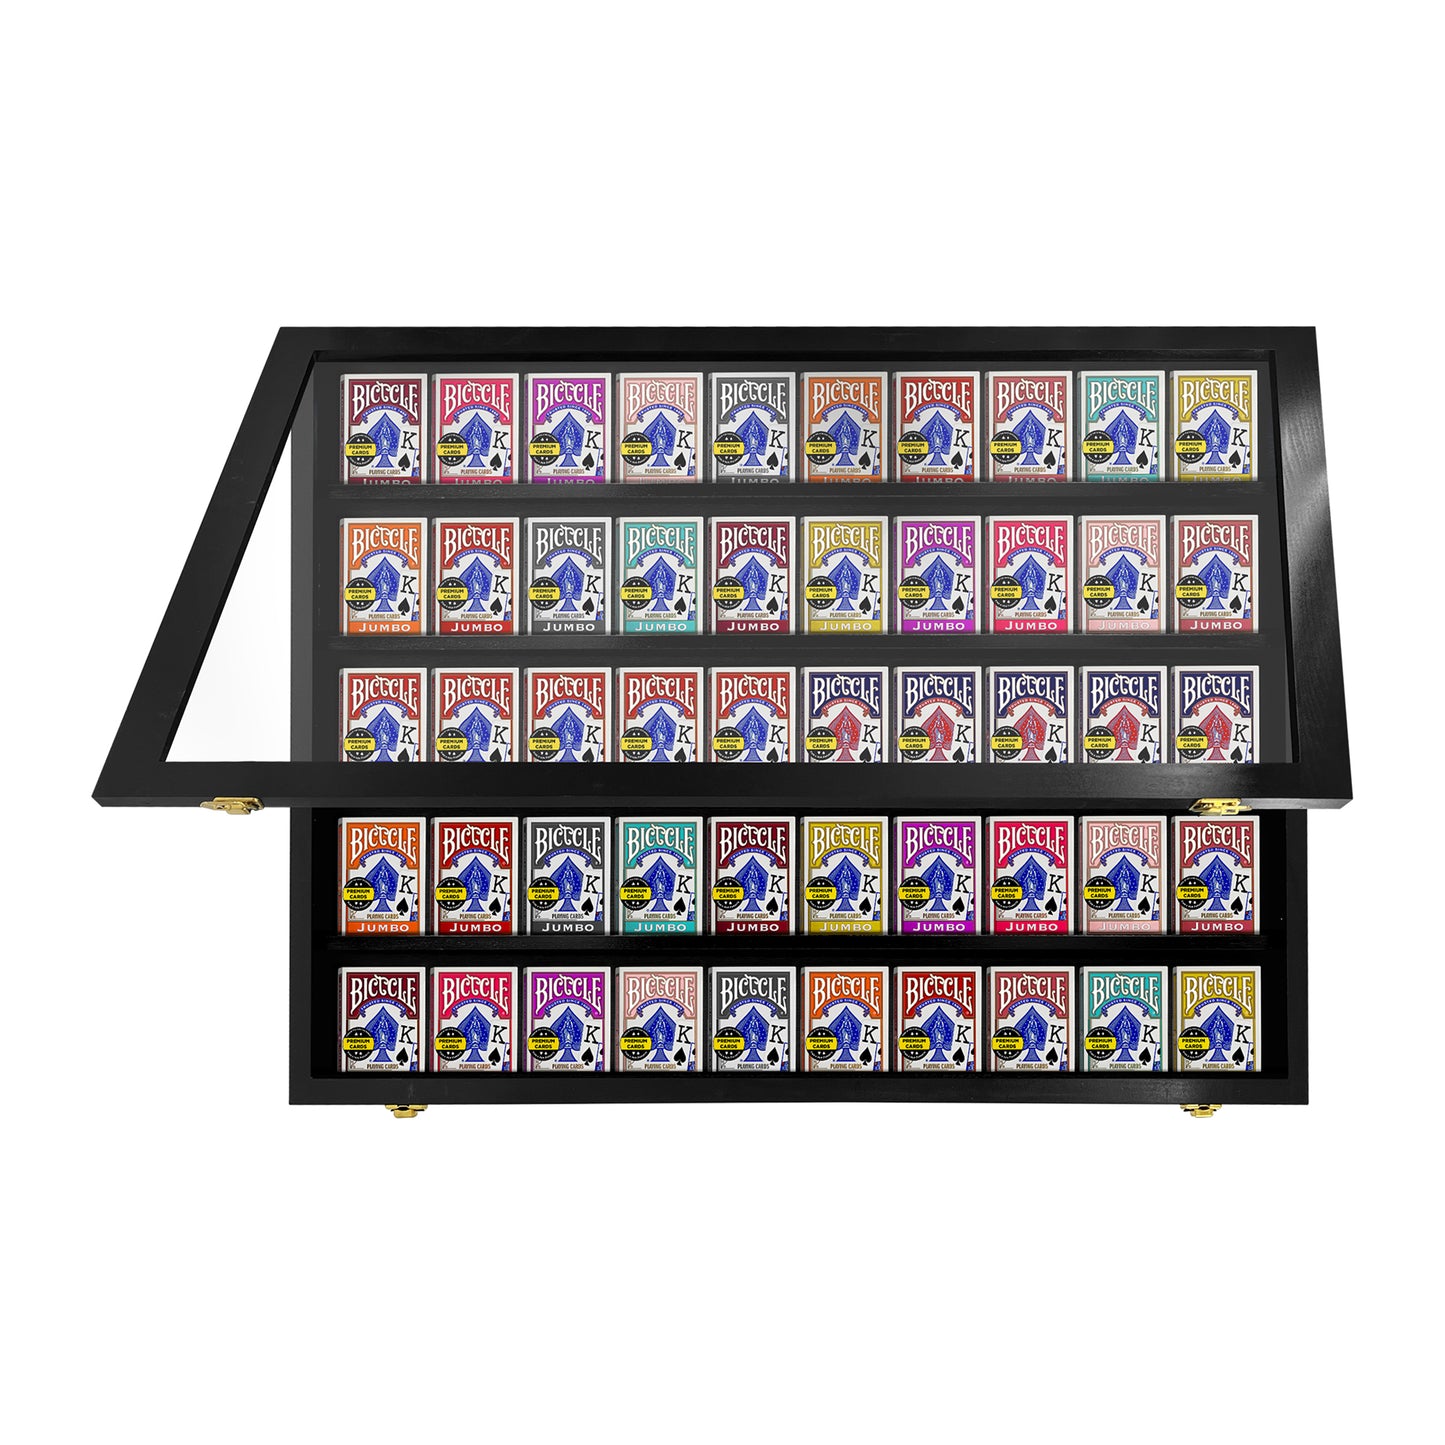 Playing Card Deck Display Case - Holds 50 Decks